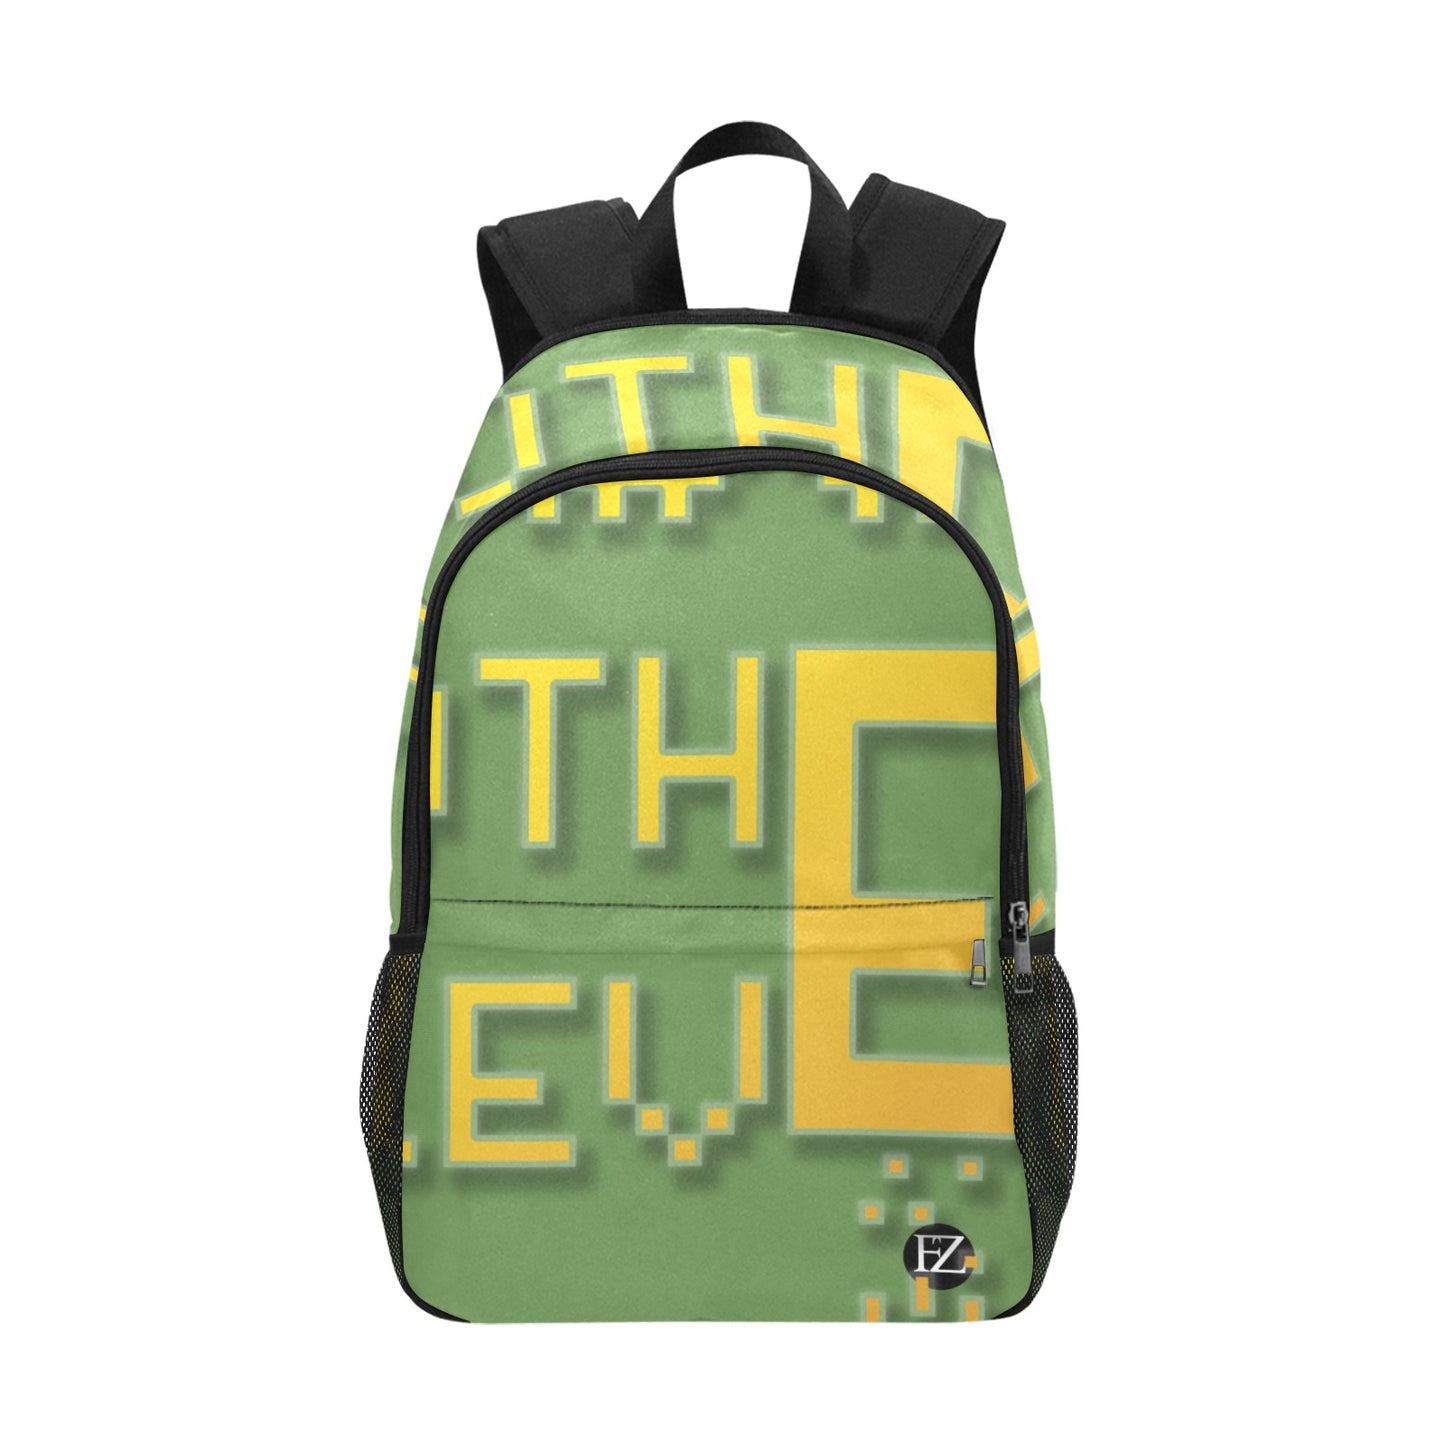 fz yellow levels backpack one size / fz levels backpack - green all-over print unisex casual backpack with side mesh pockets (model 1659)